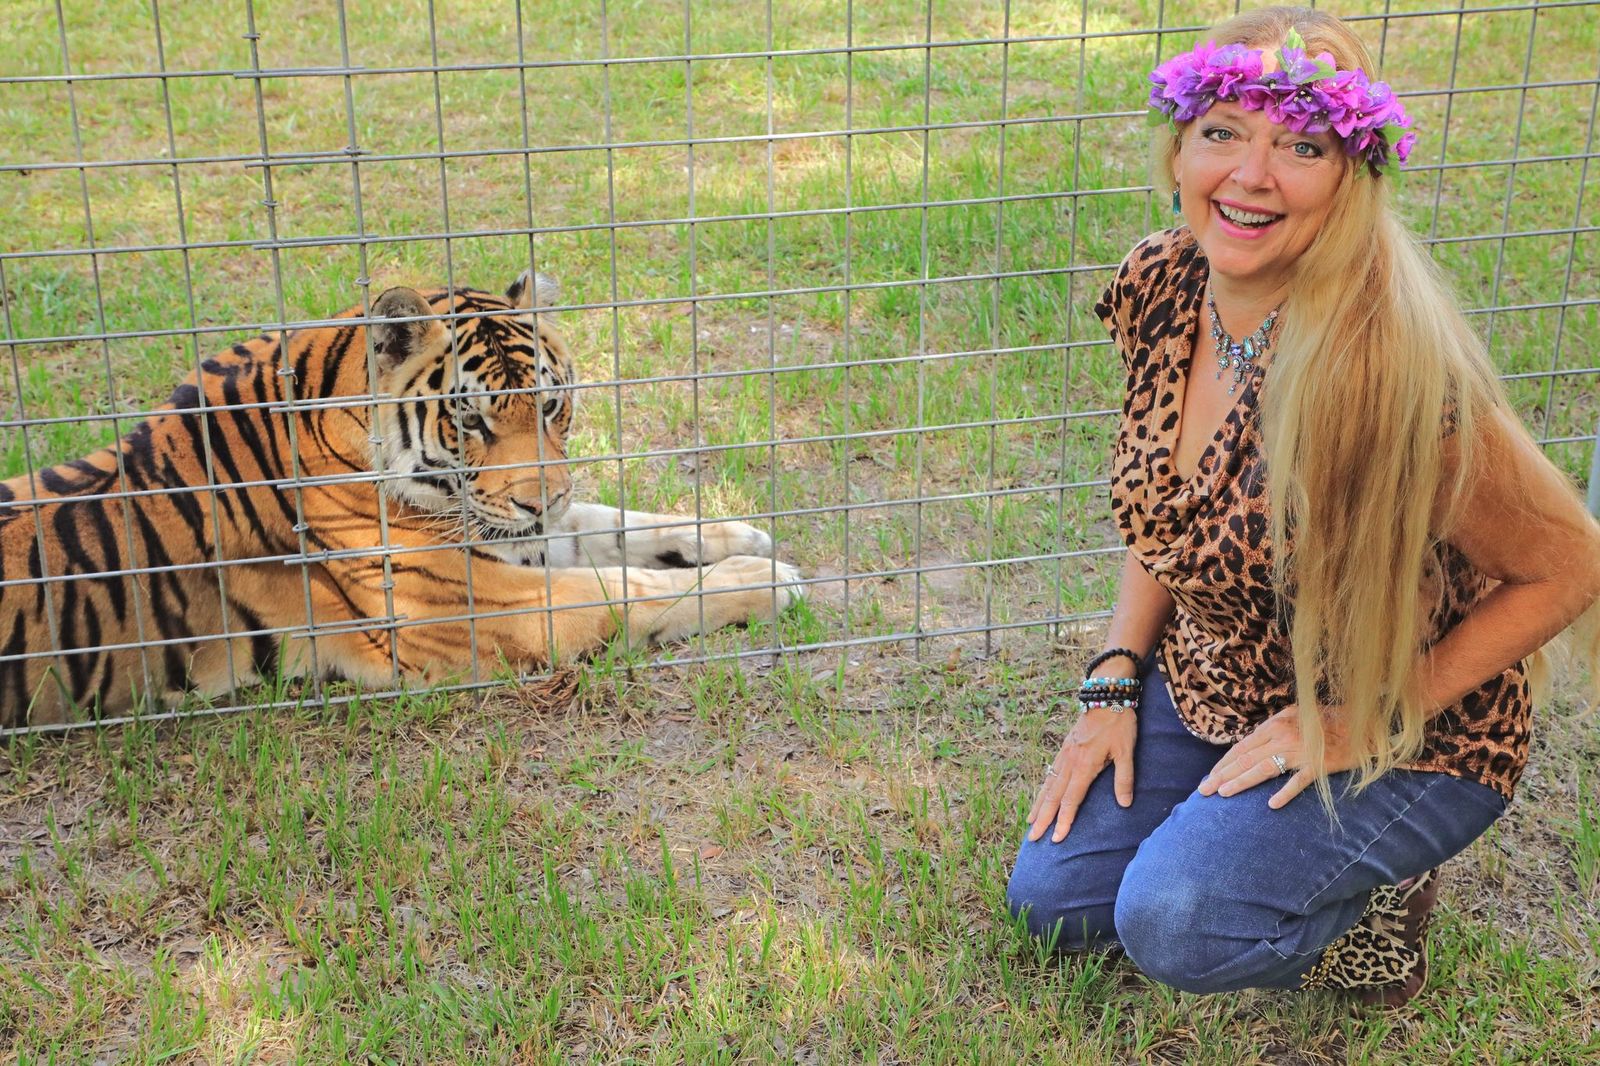 Carole Baskin wearing a cheetah print shirt with jeans sitting next to a tiger on the ground